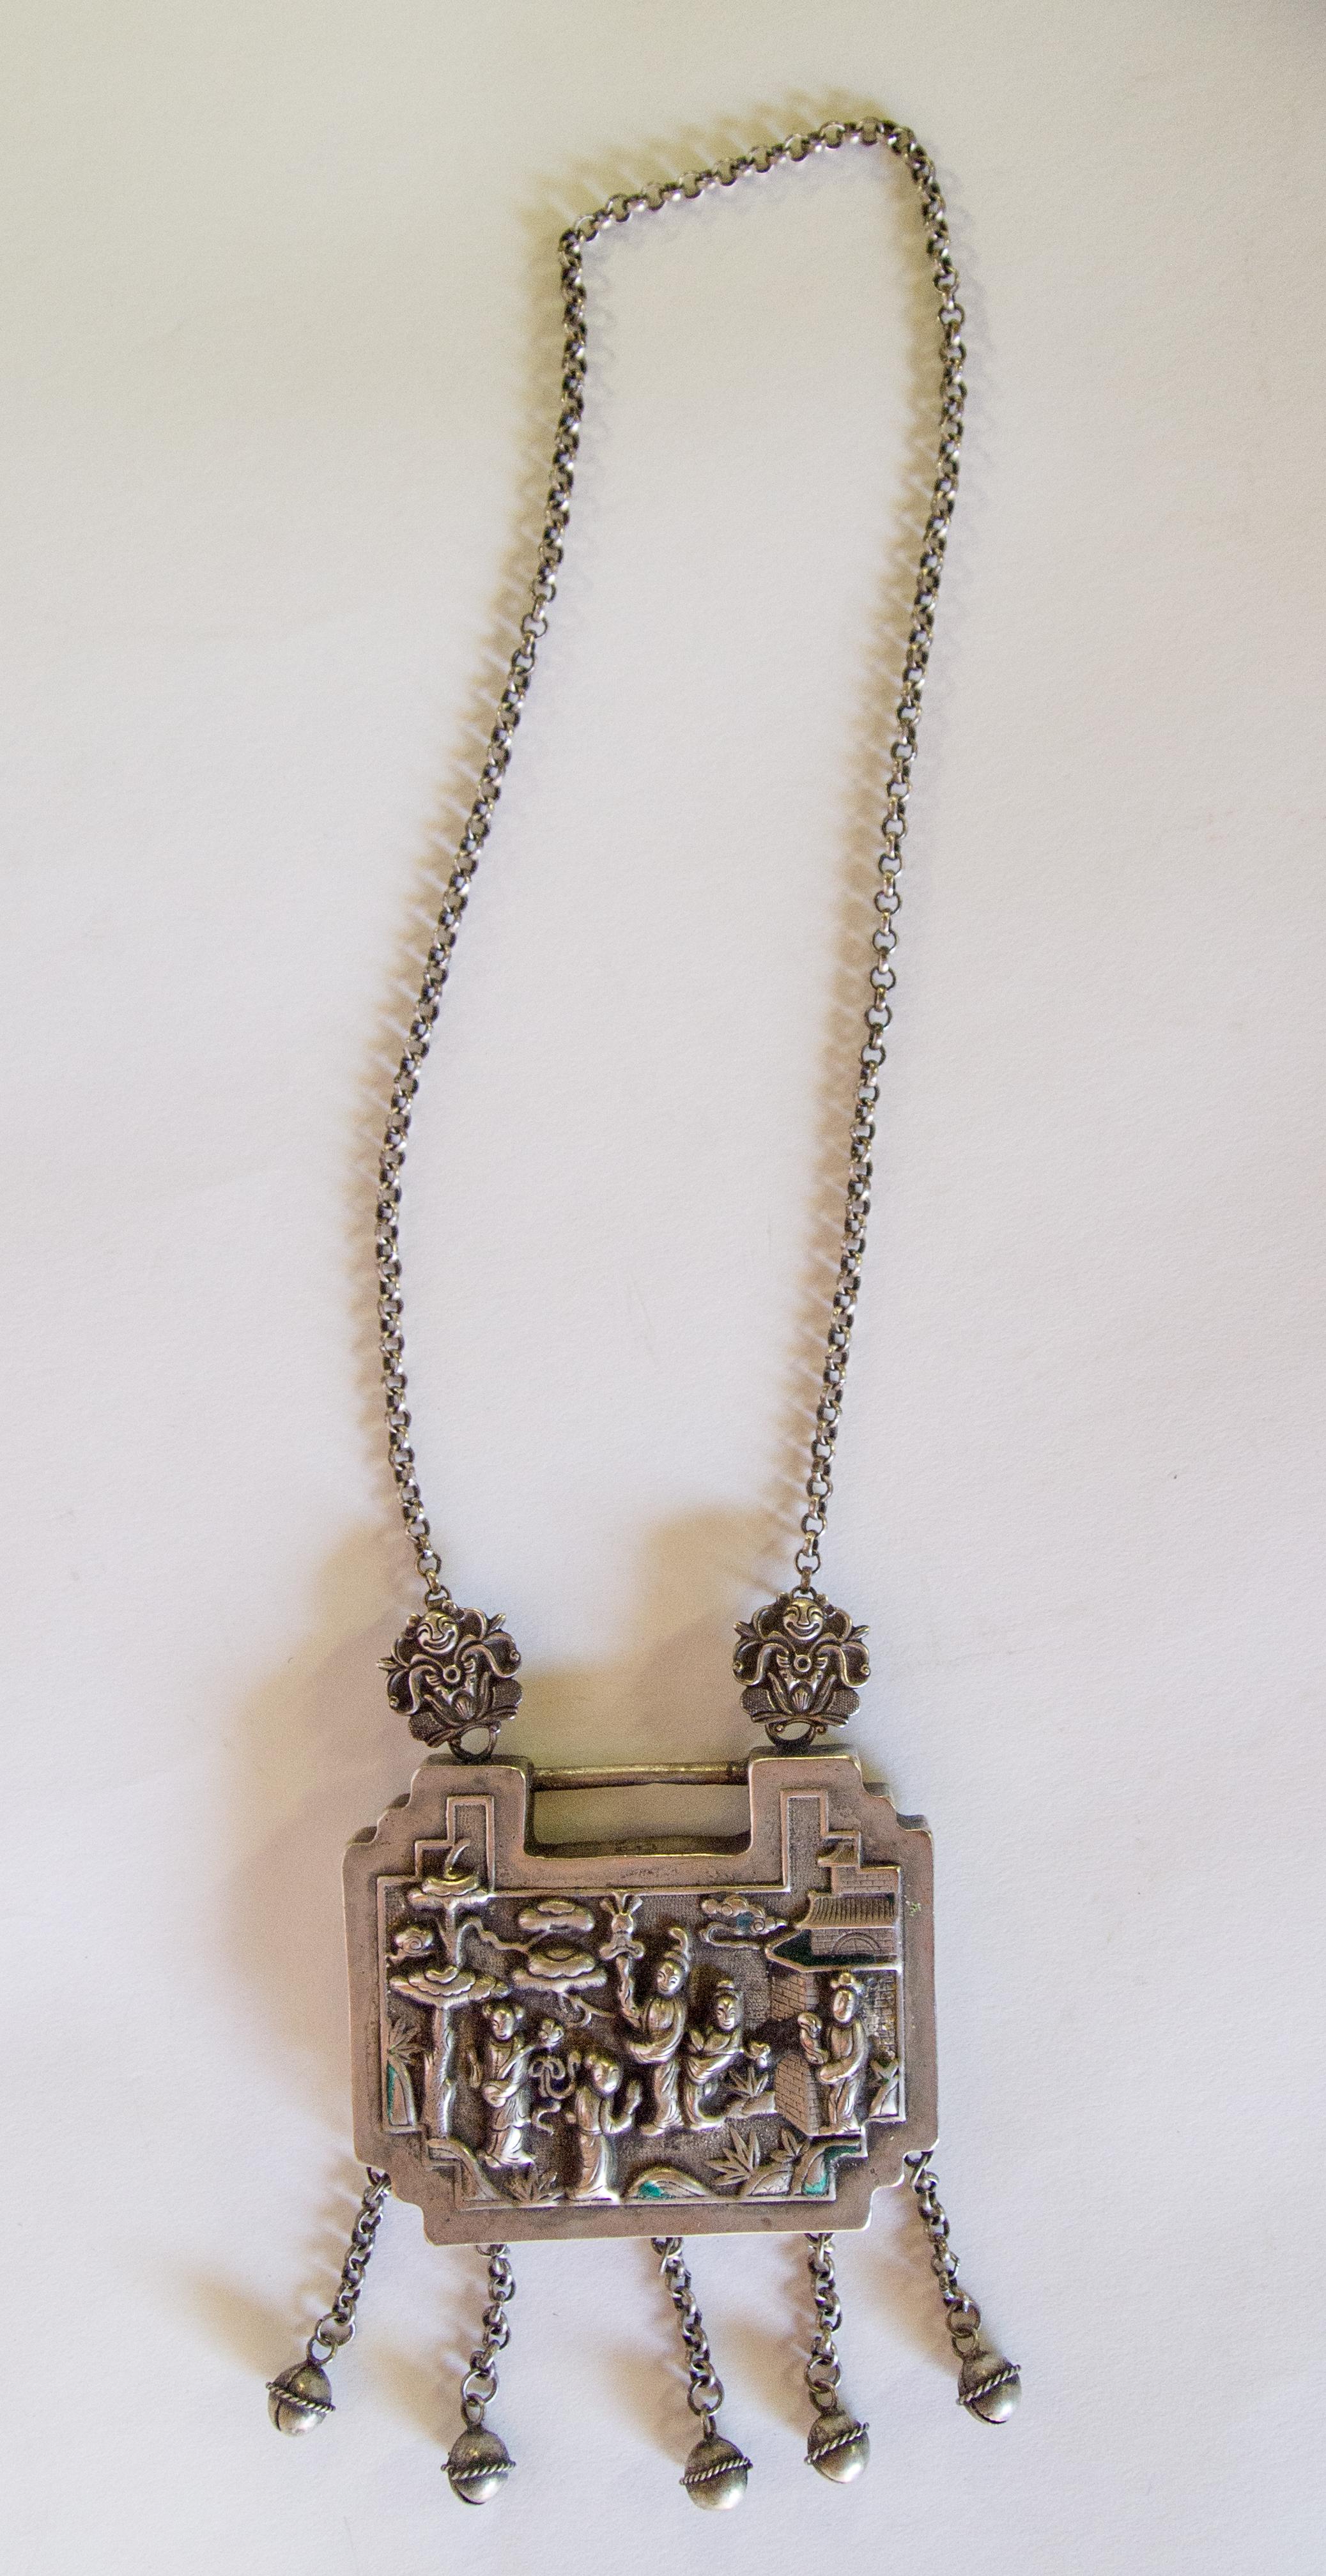 Child Amulet Lock, Silver Alloy, Yao or Hmong of SW China, Early 20th Century 6